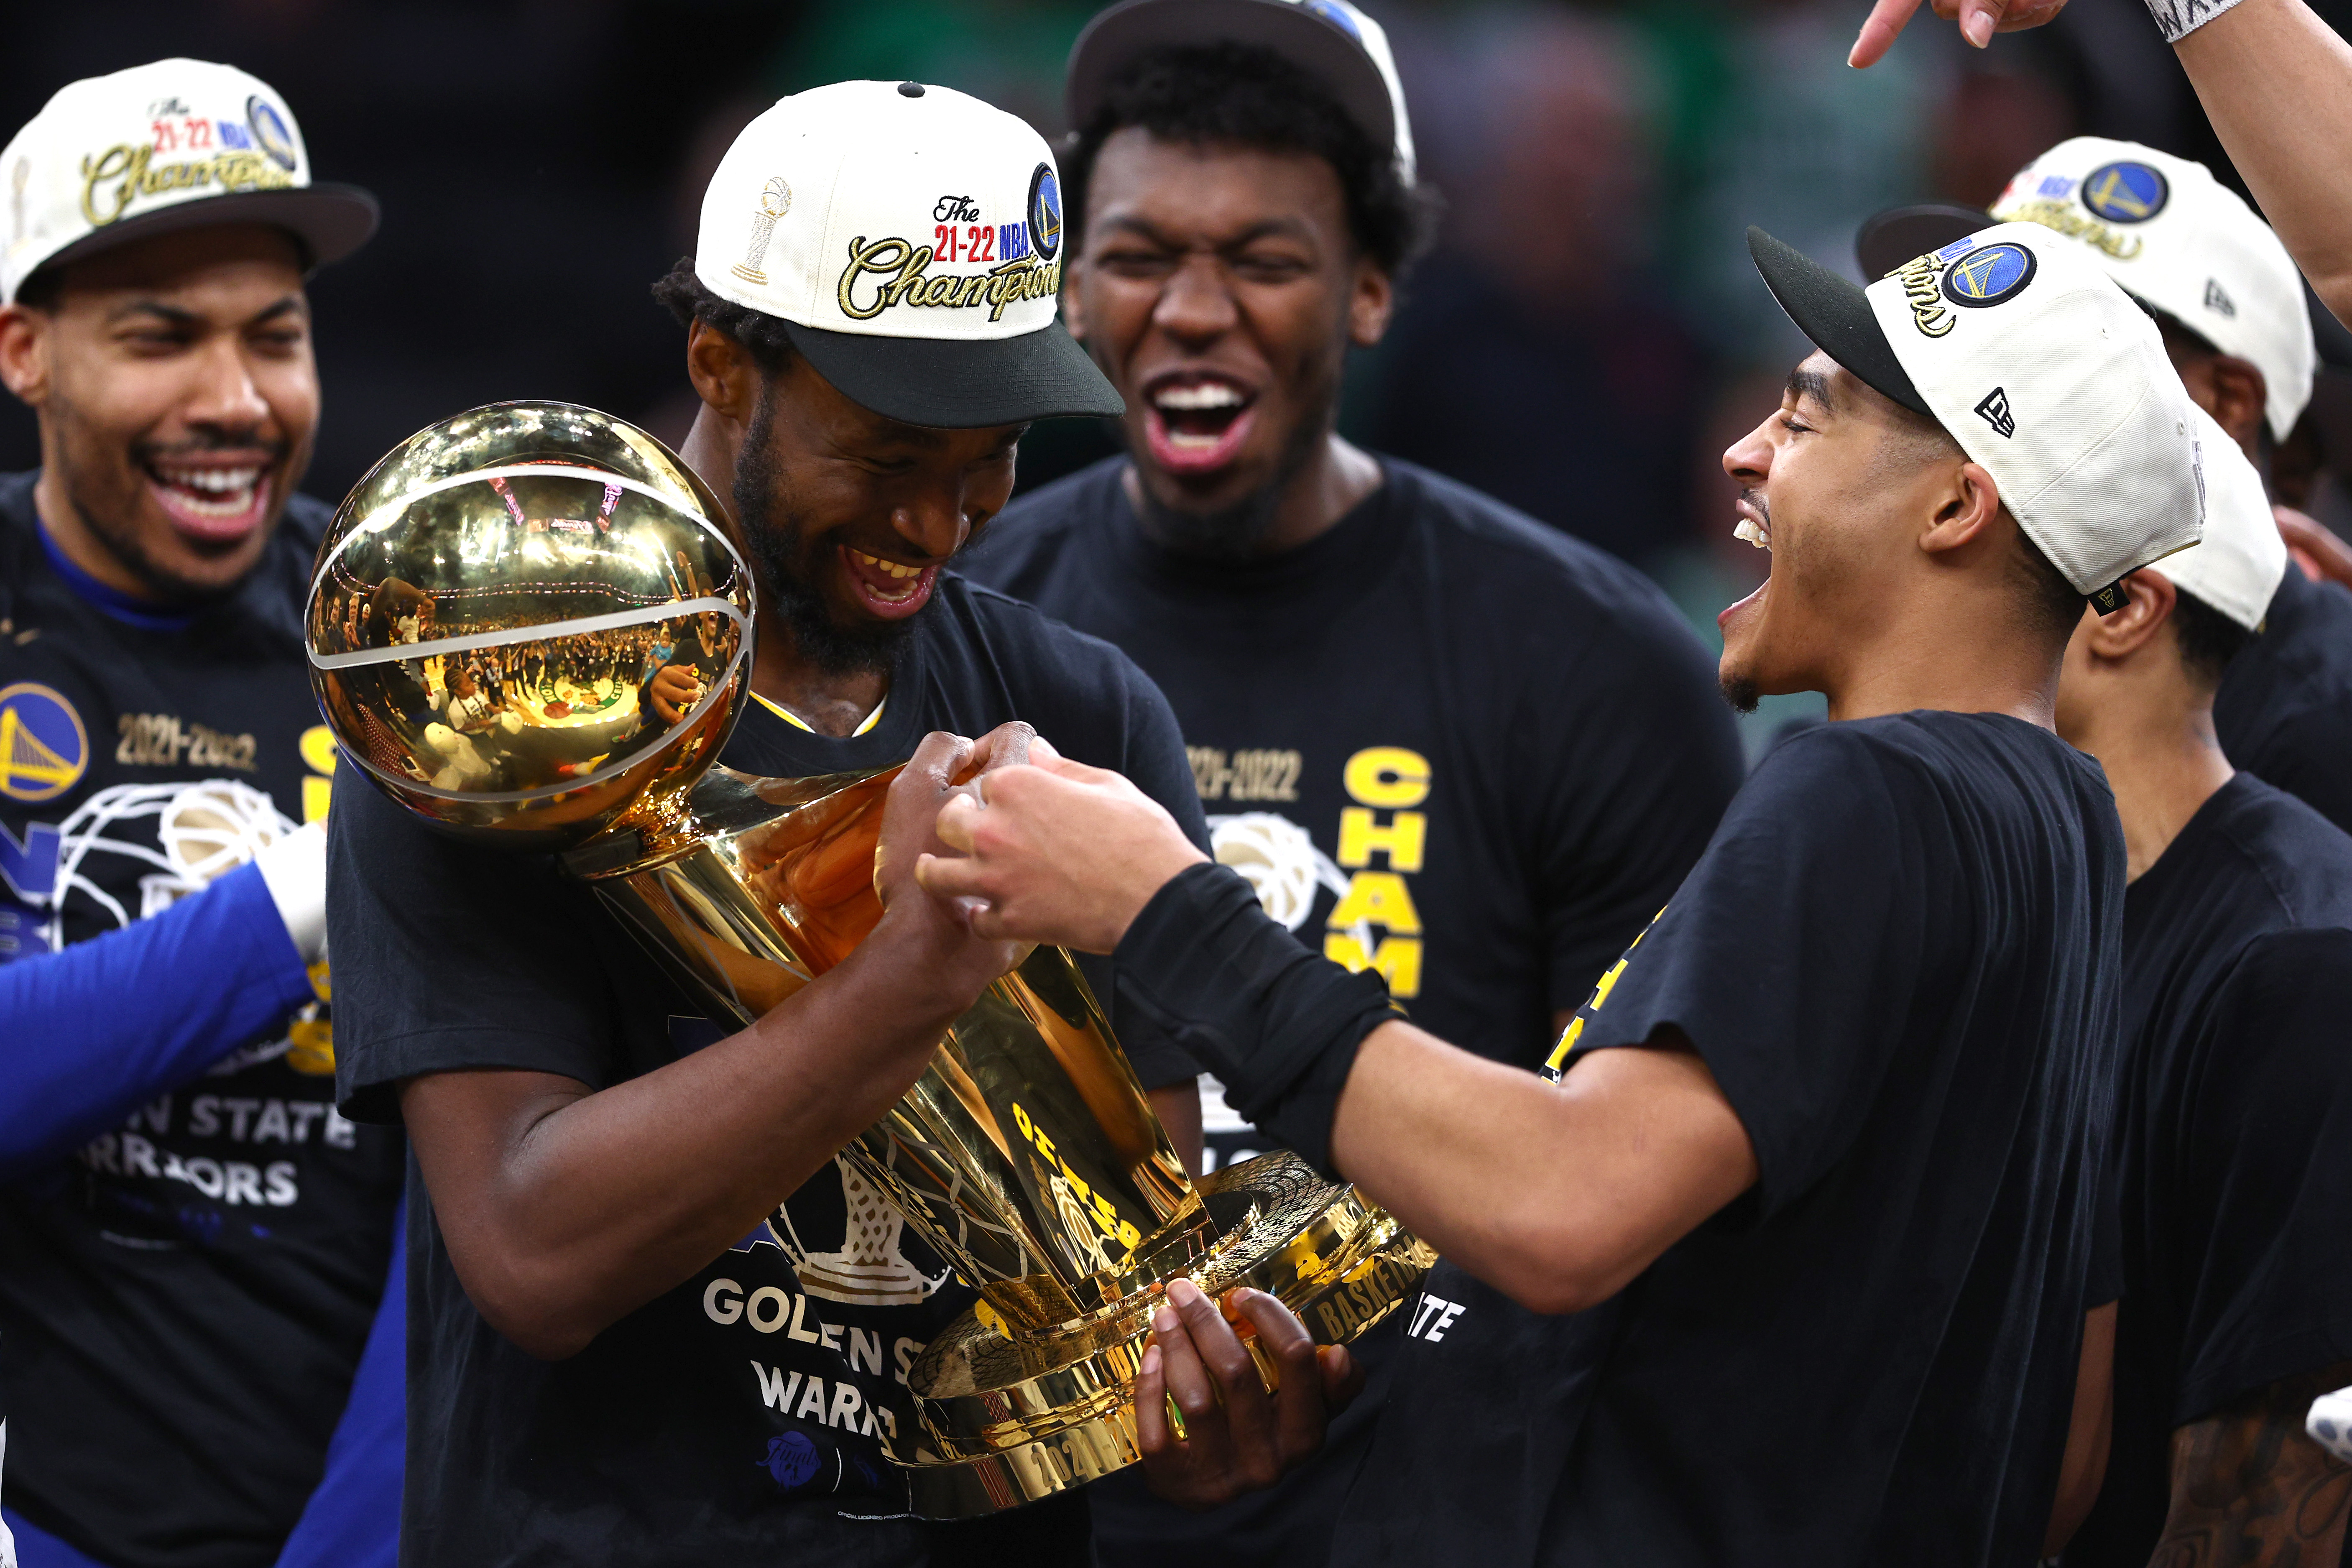 PIER 39 - The Golden State Warriors are NBA Champions!